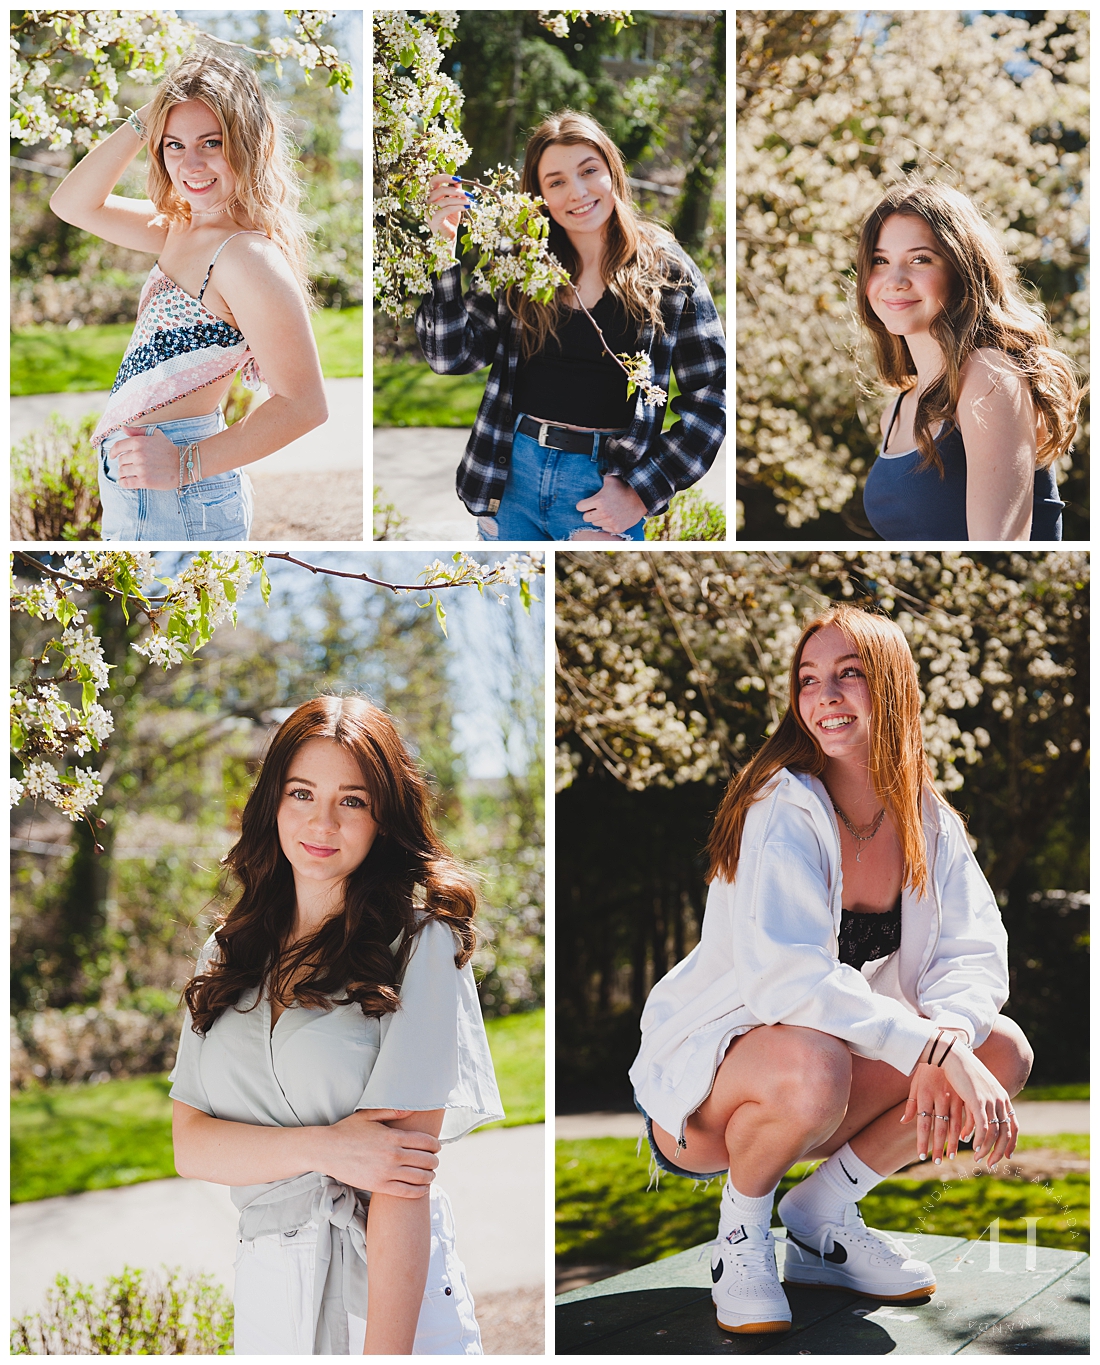 Kent Senior Portraits with Cherry Blossoms | AHP Model Team, Pose Ideas for Senior Portraits, Outfit Inspo for Casual Spring Portraits | Photographed by Tacoma Senior Portrait Photographer Amanda Howse